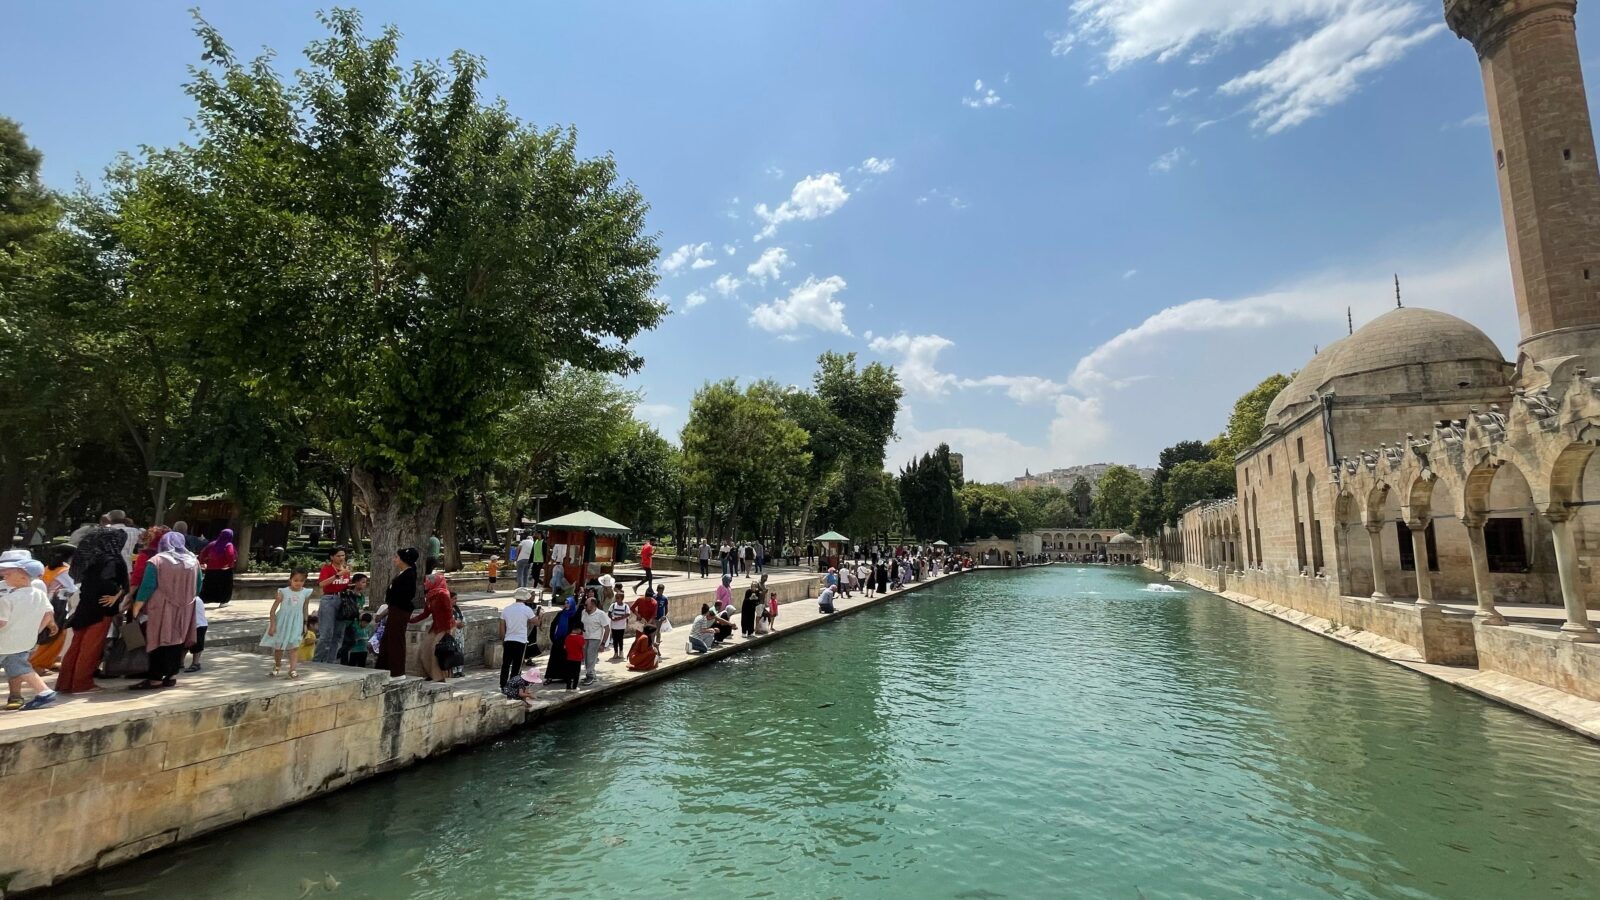 From ancient wonders to nighttime traditions: Experiencing Sanliurfa's rich culture